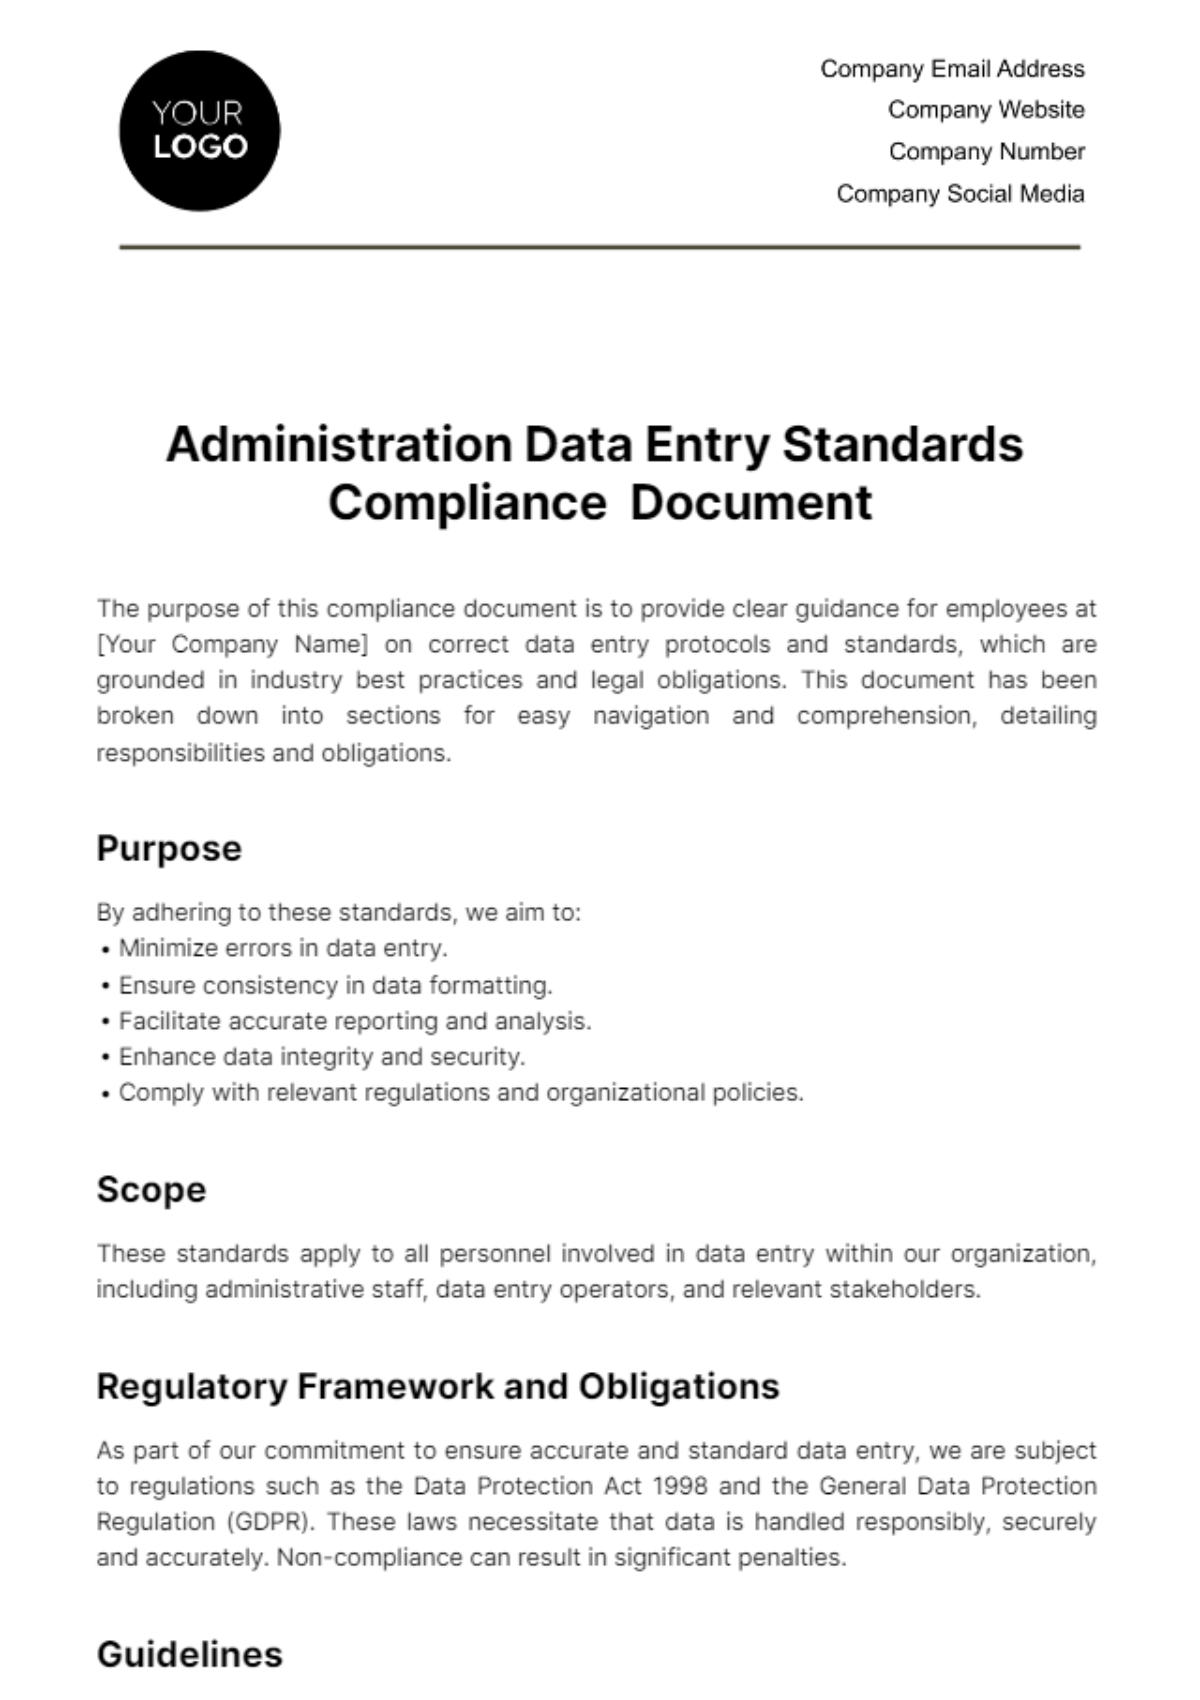 Free Administration Data Entry Standards Compliance Document Template